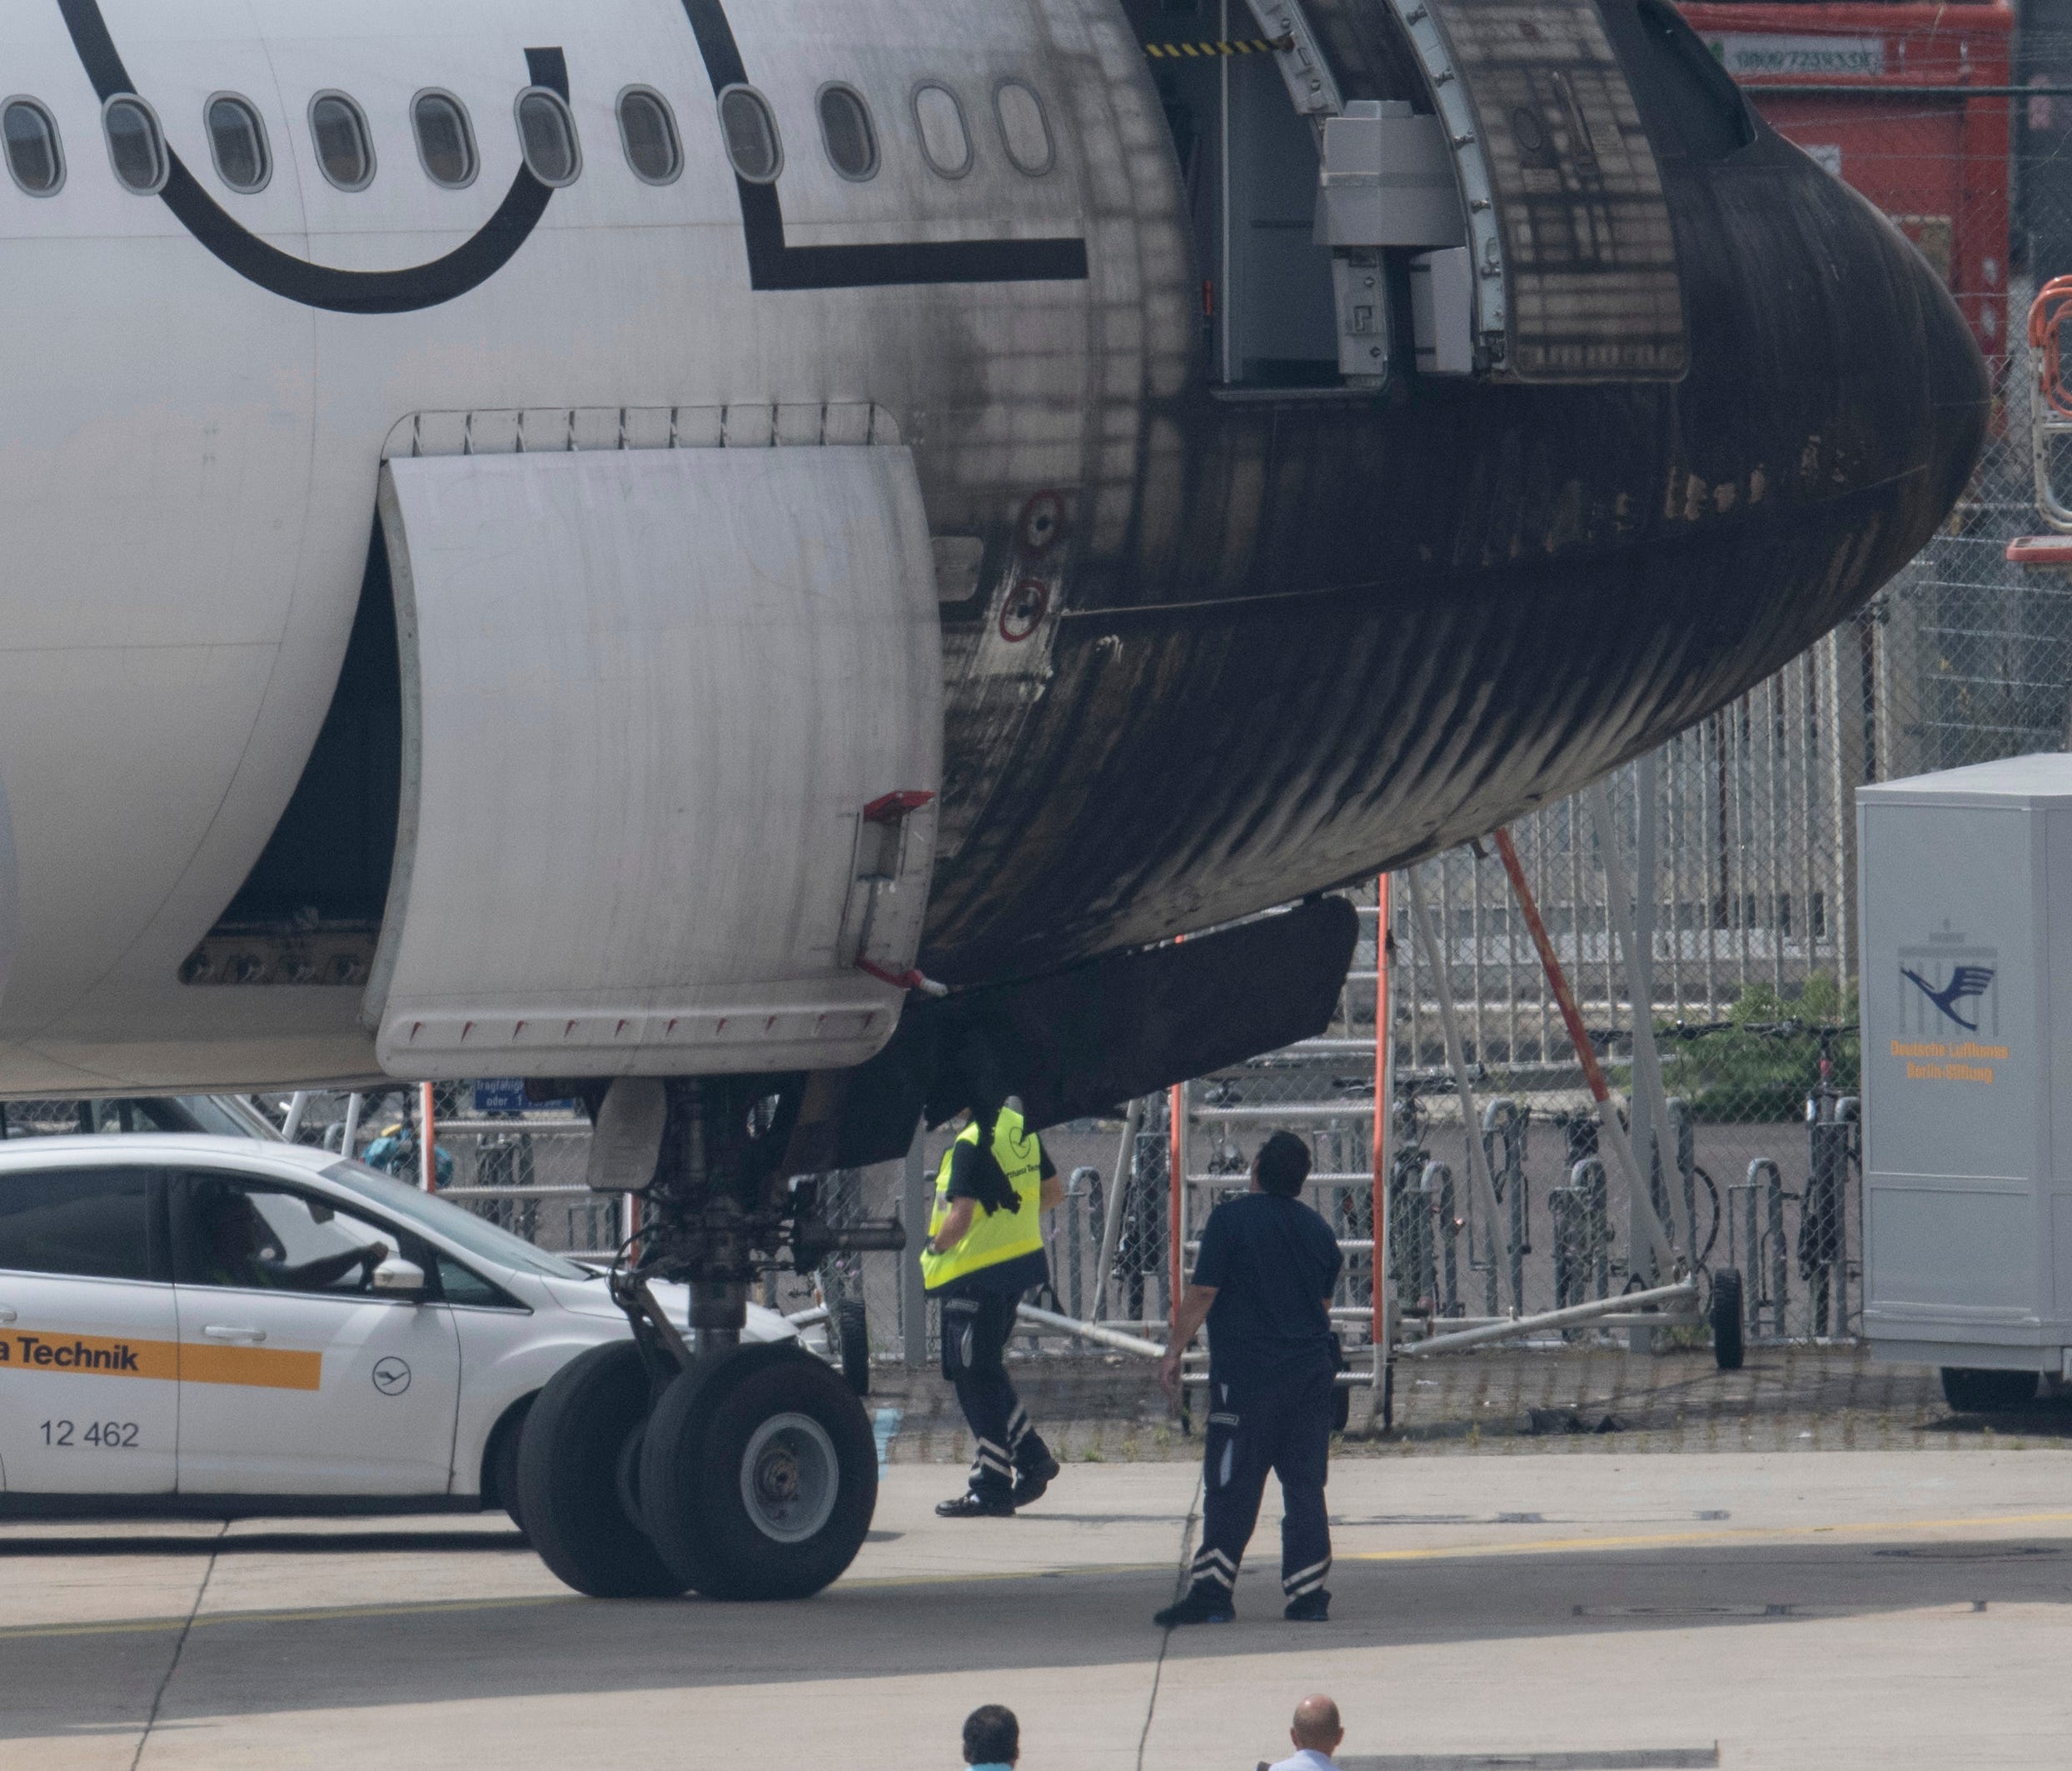 The blackened and heavily damaged cockpit area of Lufthansa Airbus A340 is seen after the incident at Germany's Frankfurt Airport on June 11, 2018. The aircraft was painted in a special Star Alliance paint scheme.